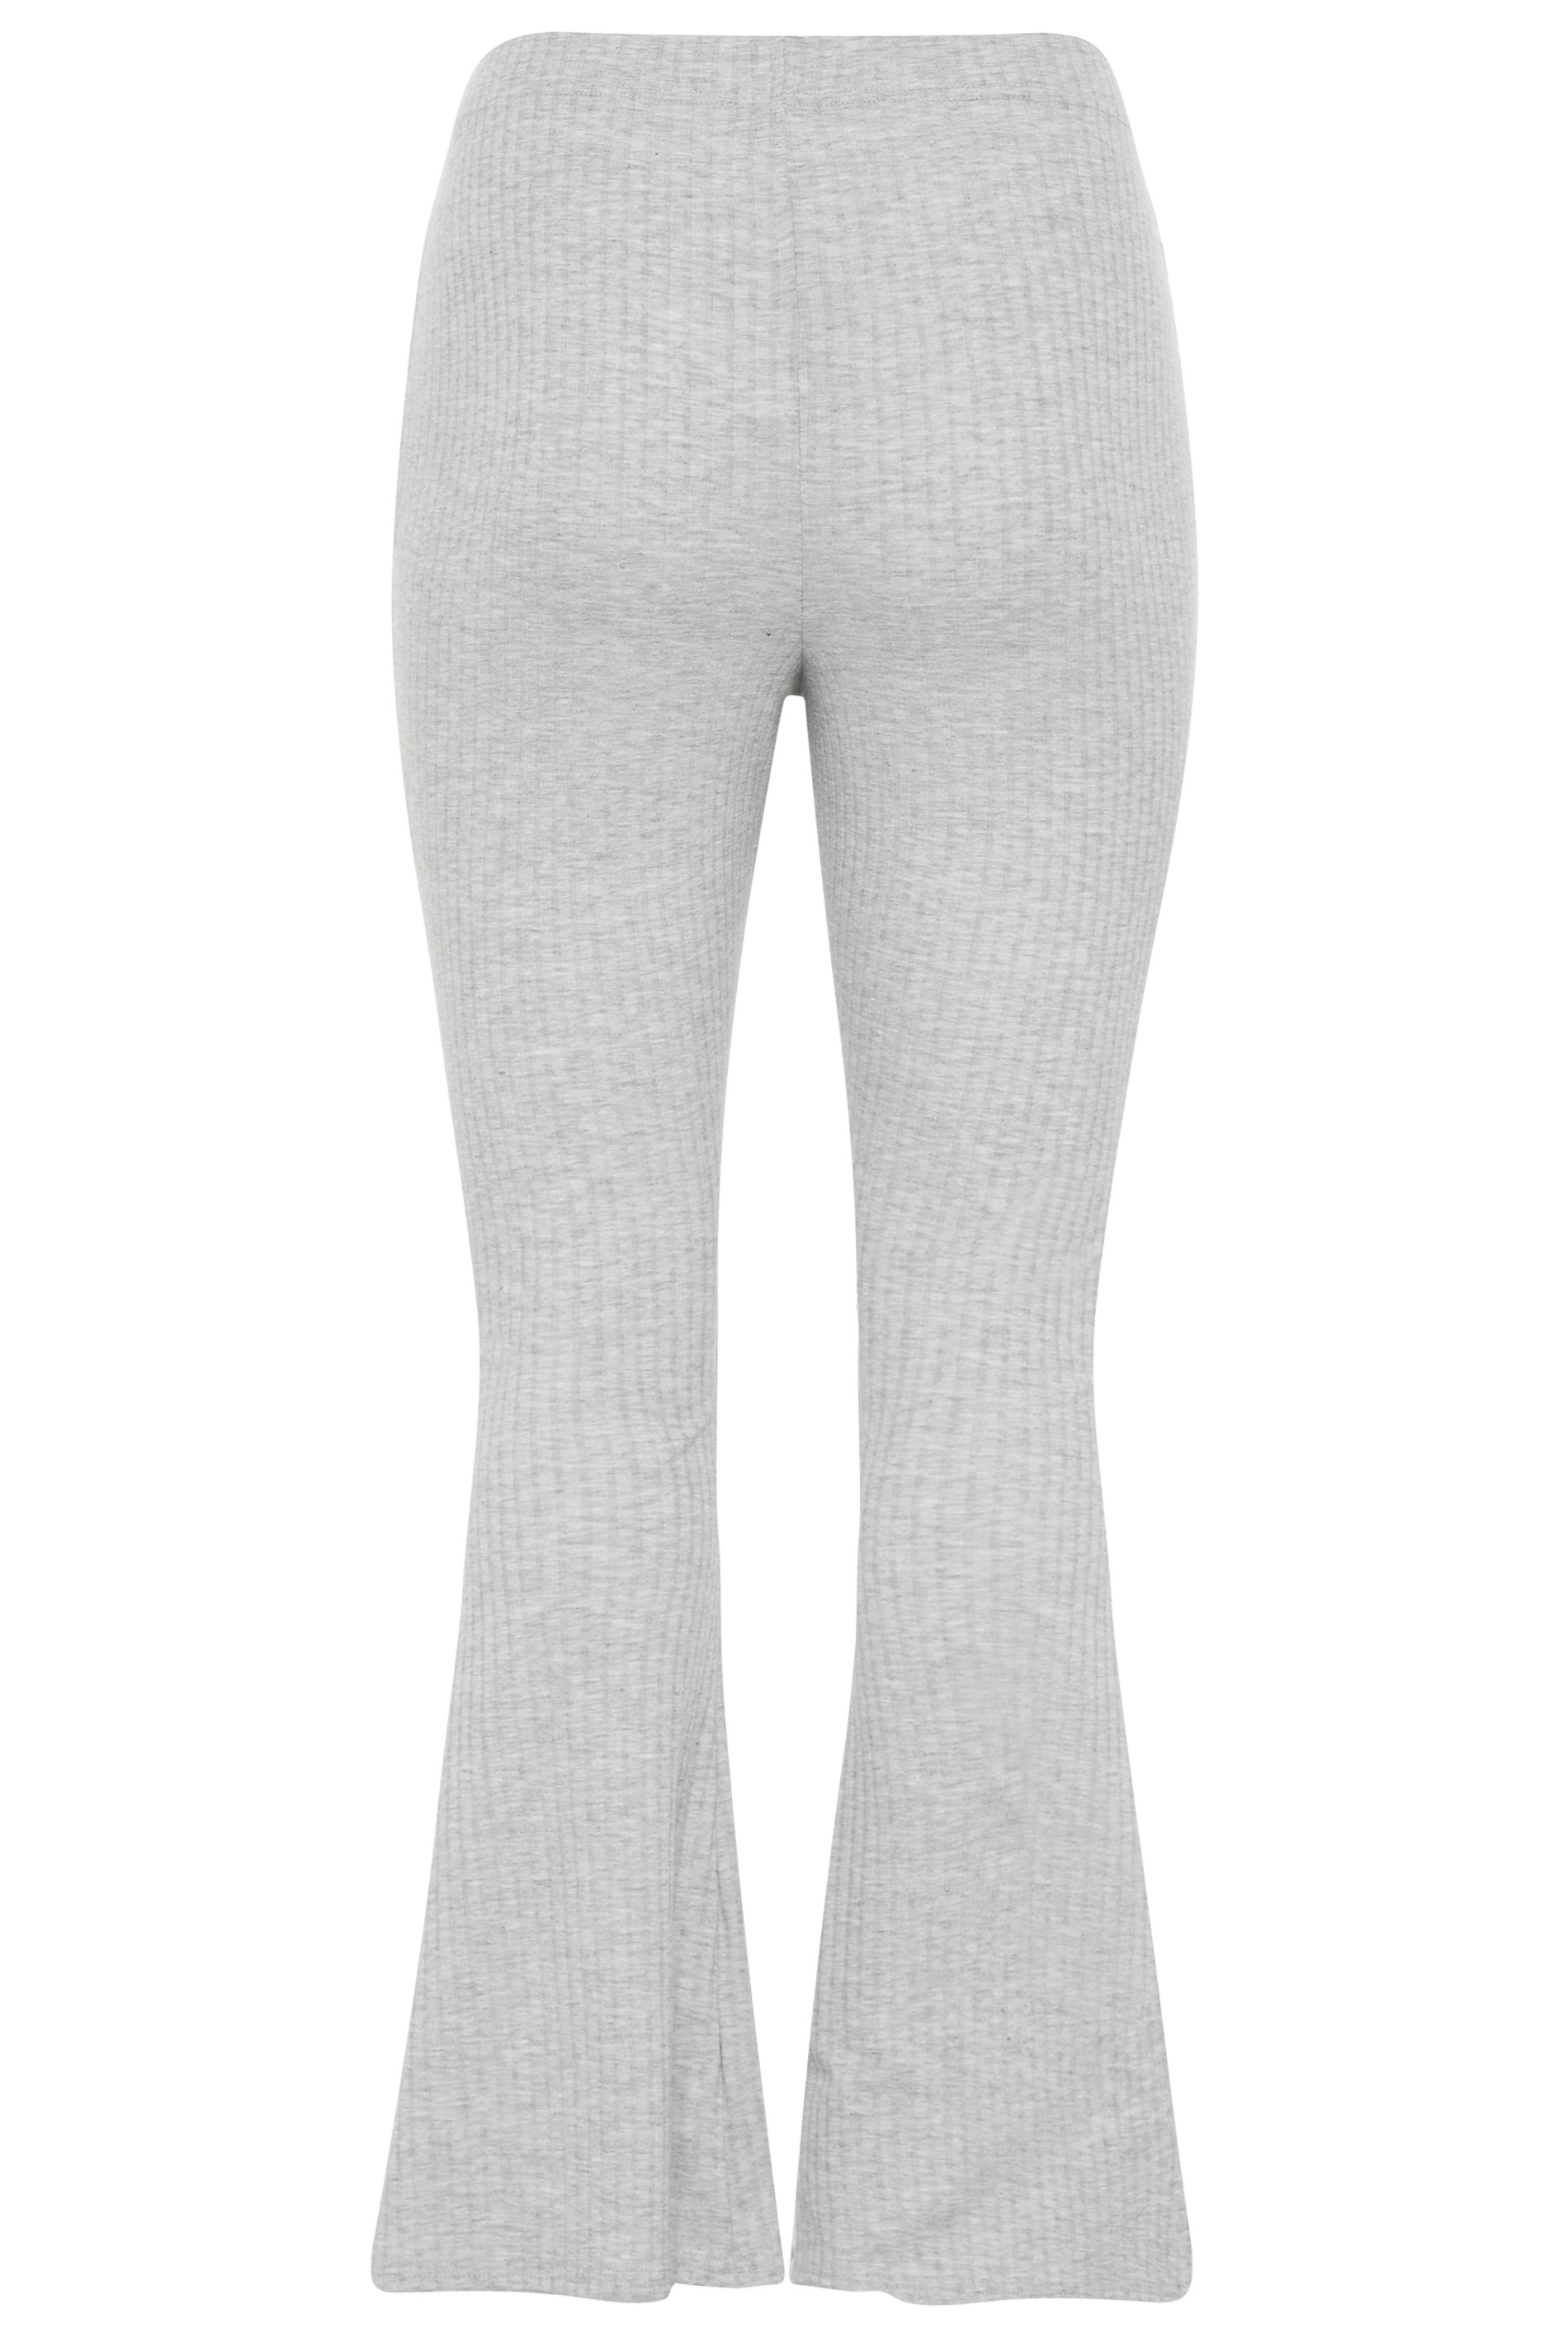 Grey Ribbed Flare Leggings | Yours Clothing